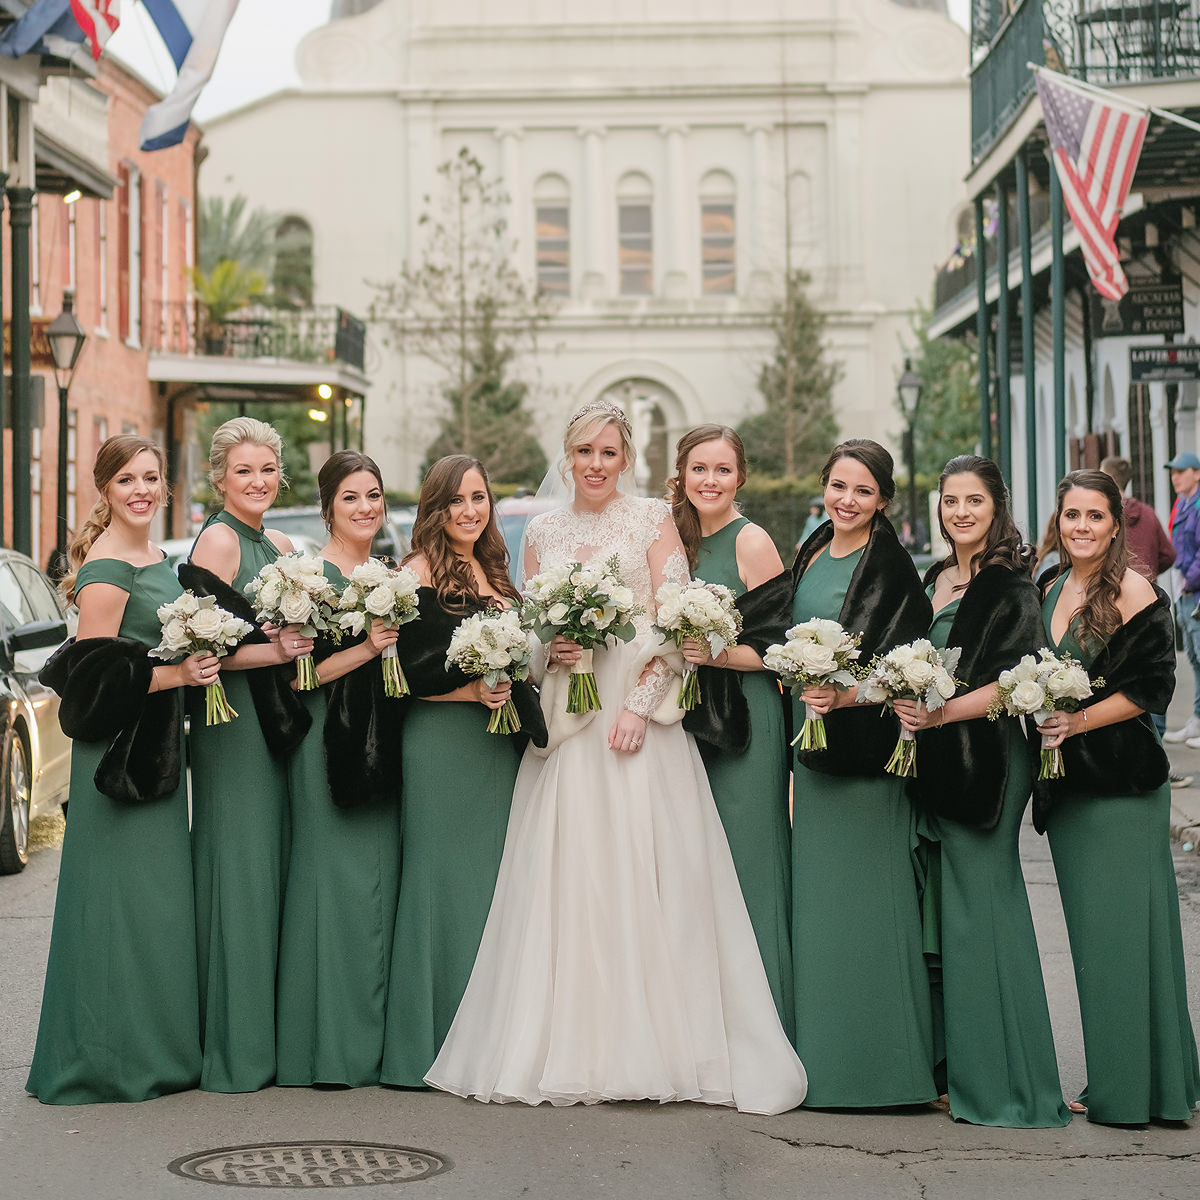 St Louis Cathedral Pat O’s on the River Wedding Photographer | Greg & Ashley